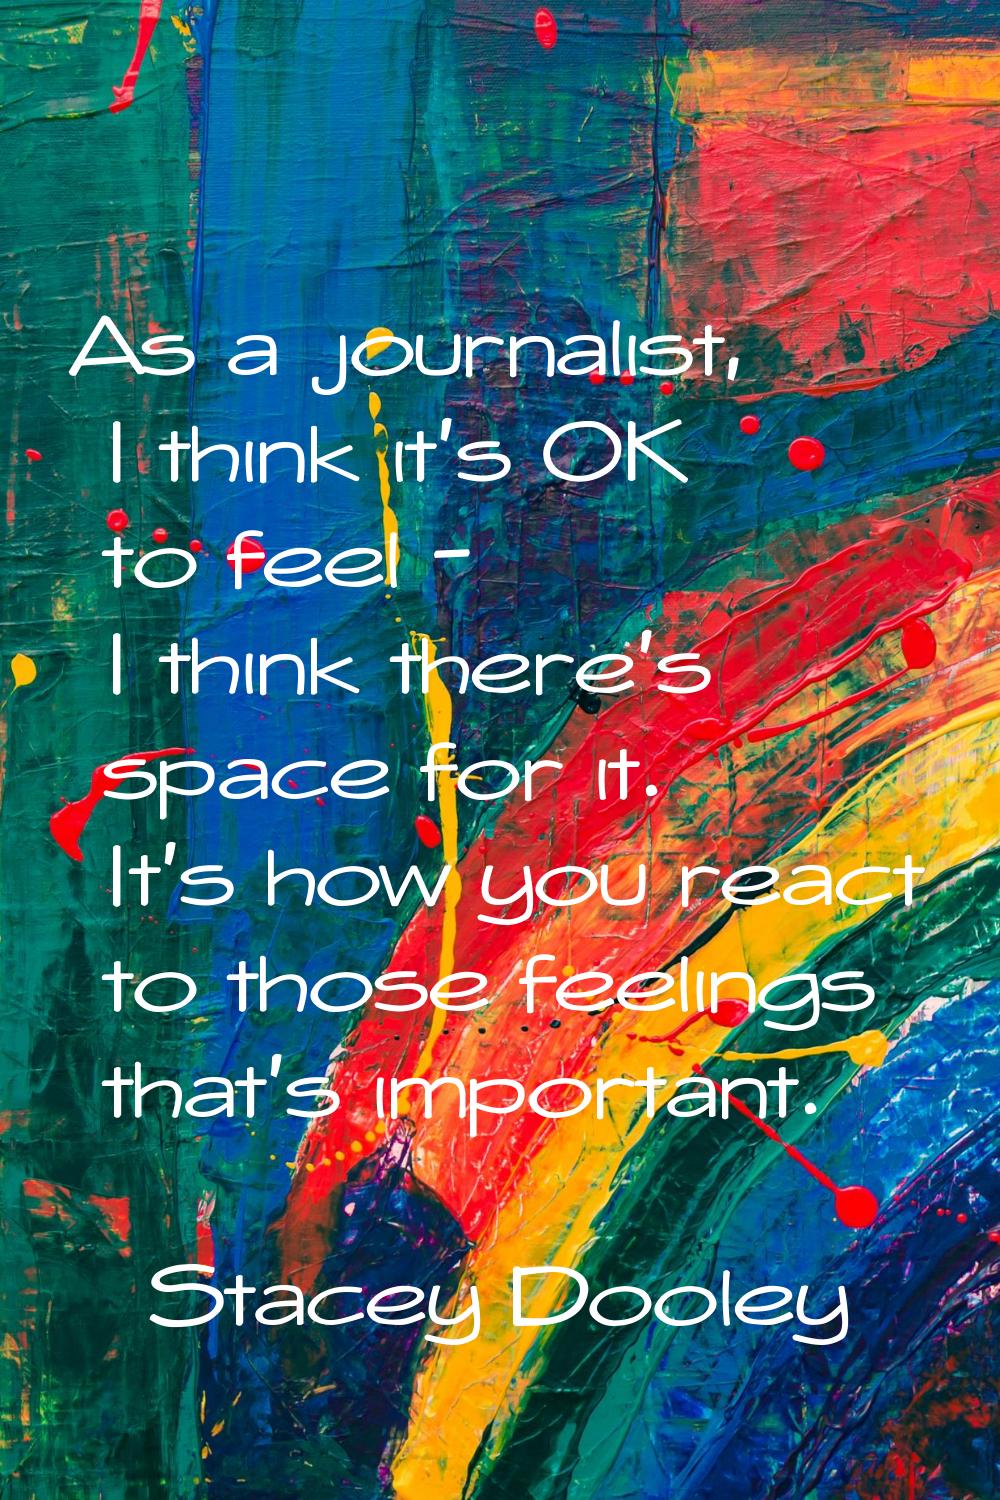 As a journalist, I think it's OK to feel - I think there's space for it. It's how you react to thos